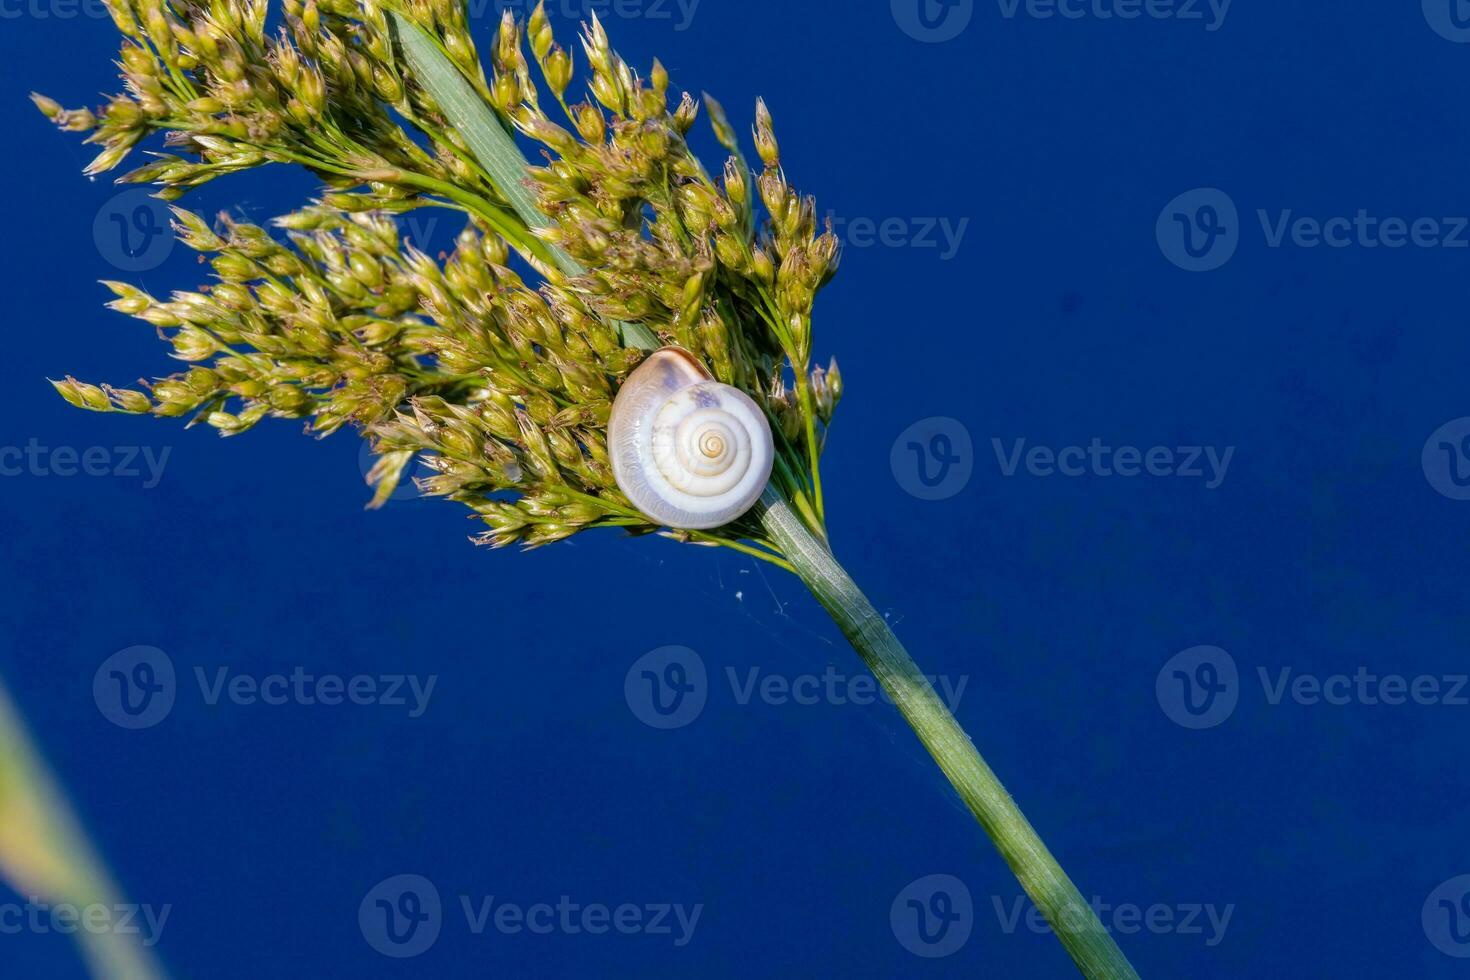 Background with a white snail in the form of a spiral on plants and against a blue sky photo